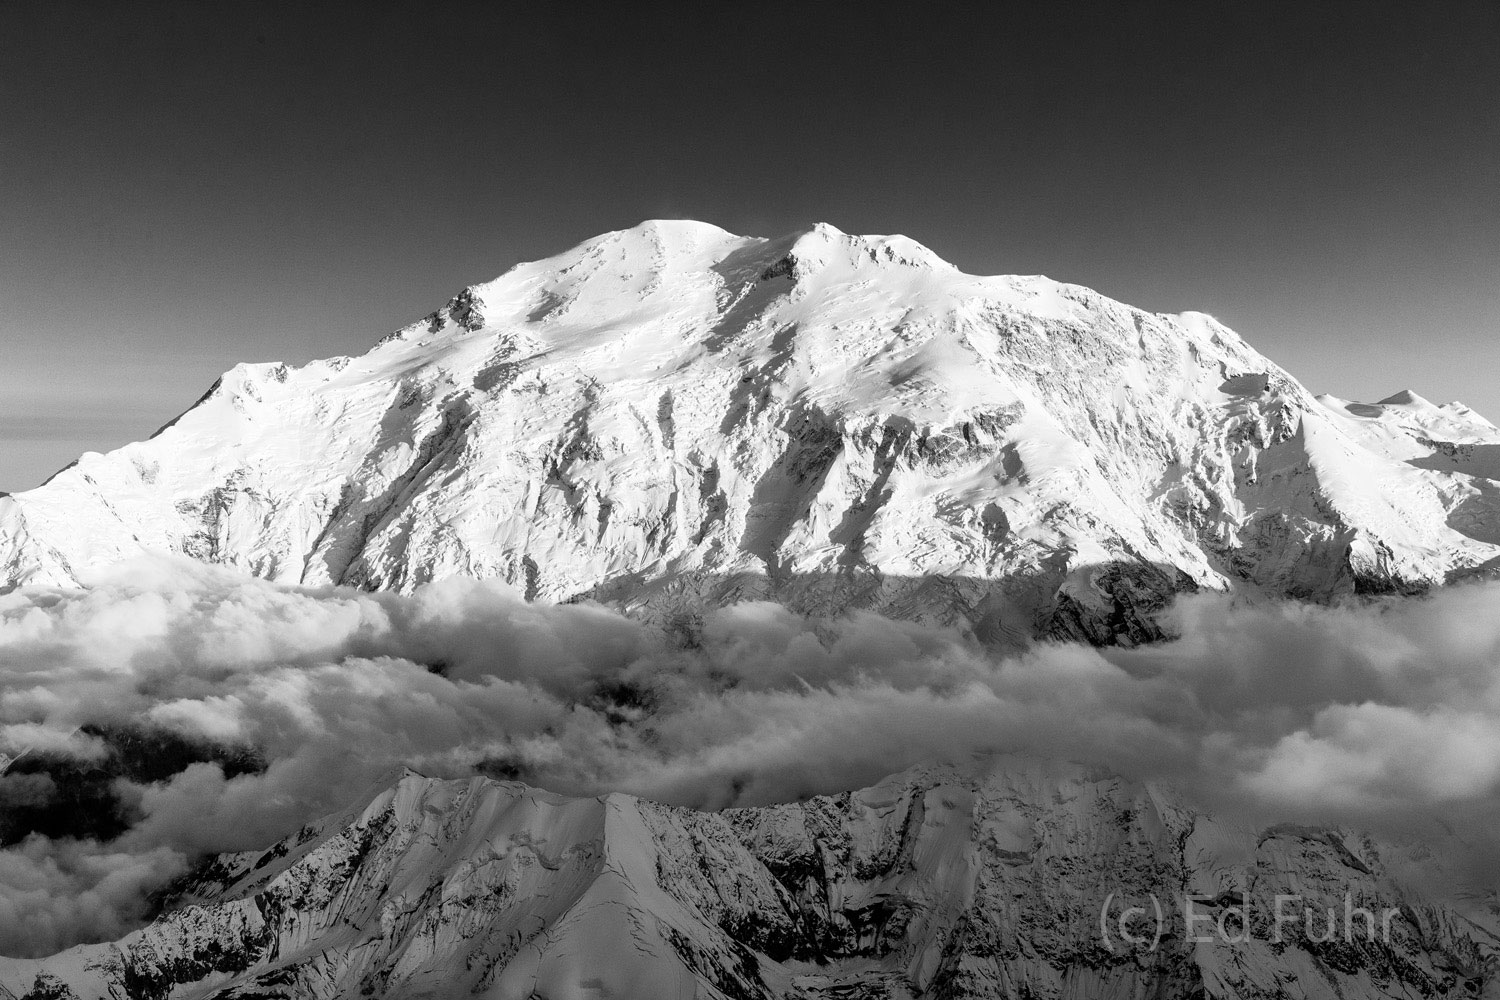 Denali's western face in black and white